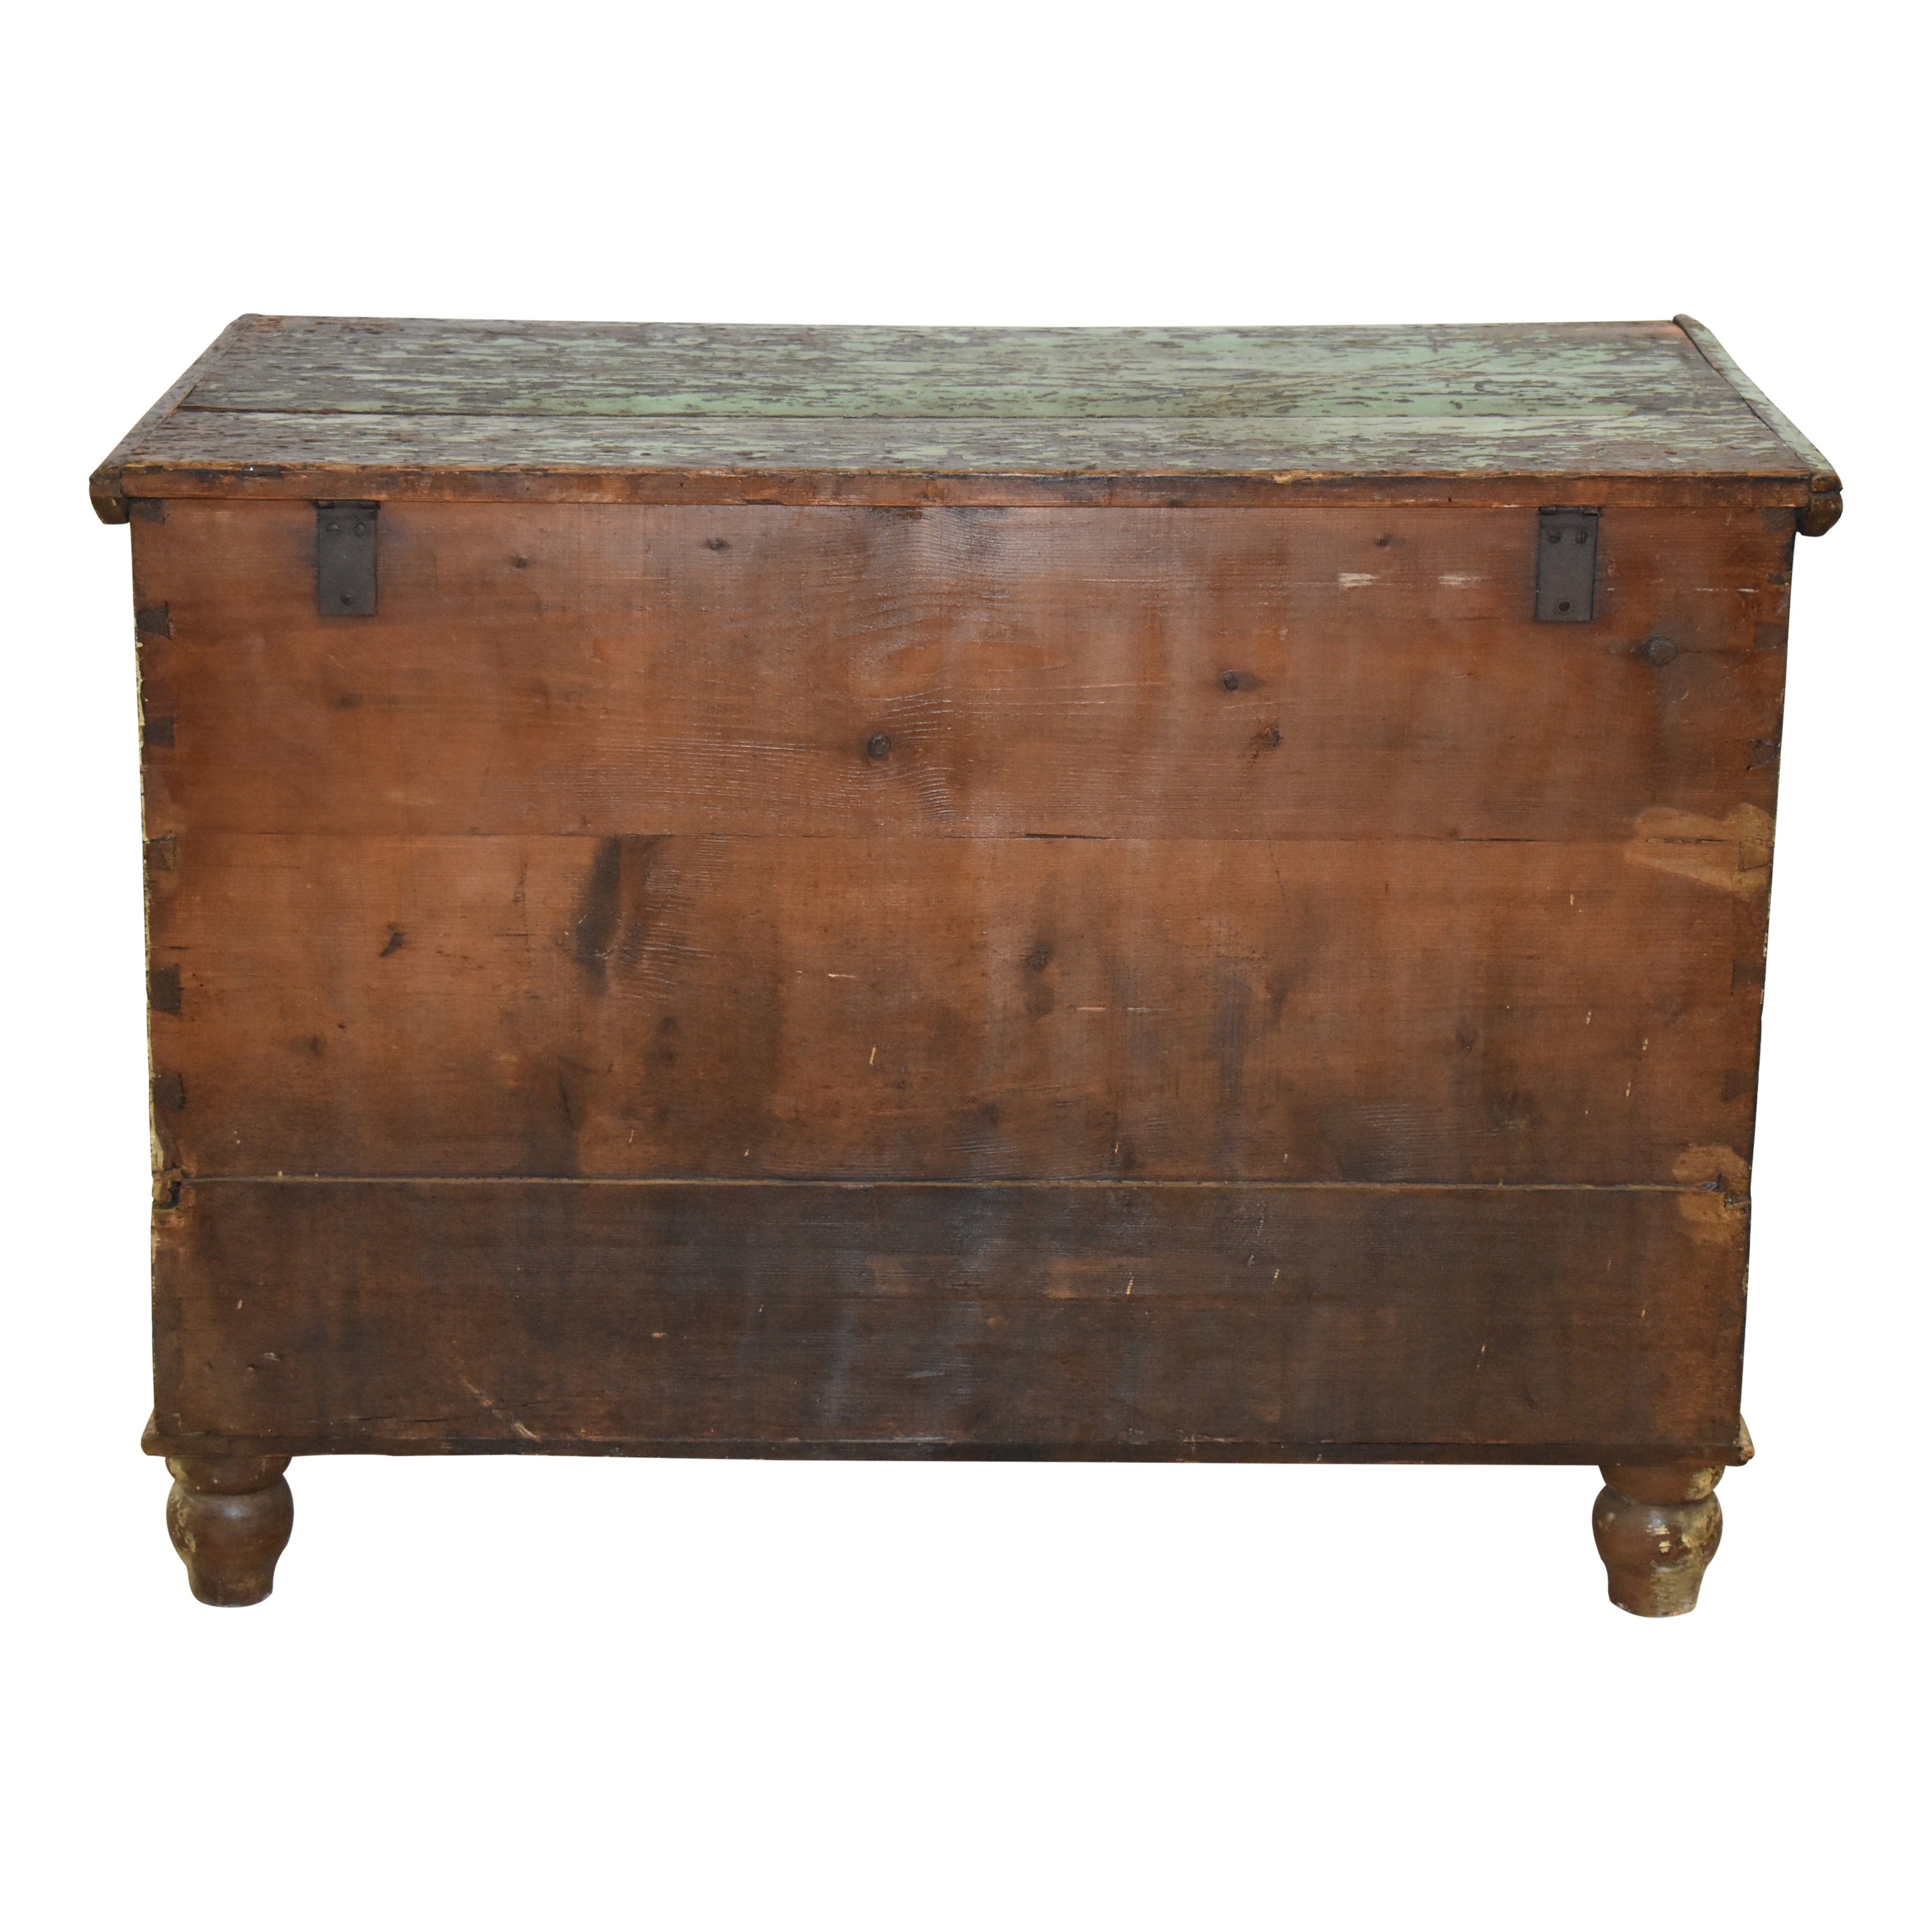 Painted Hope Chest with Lower Drawer